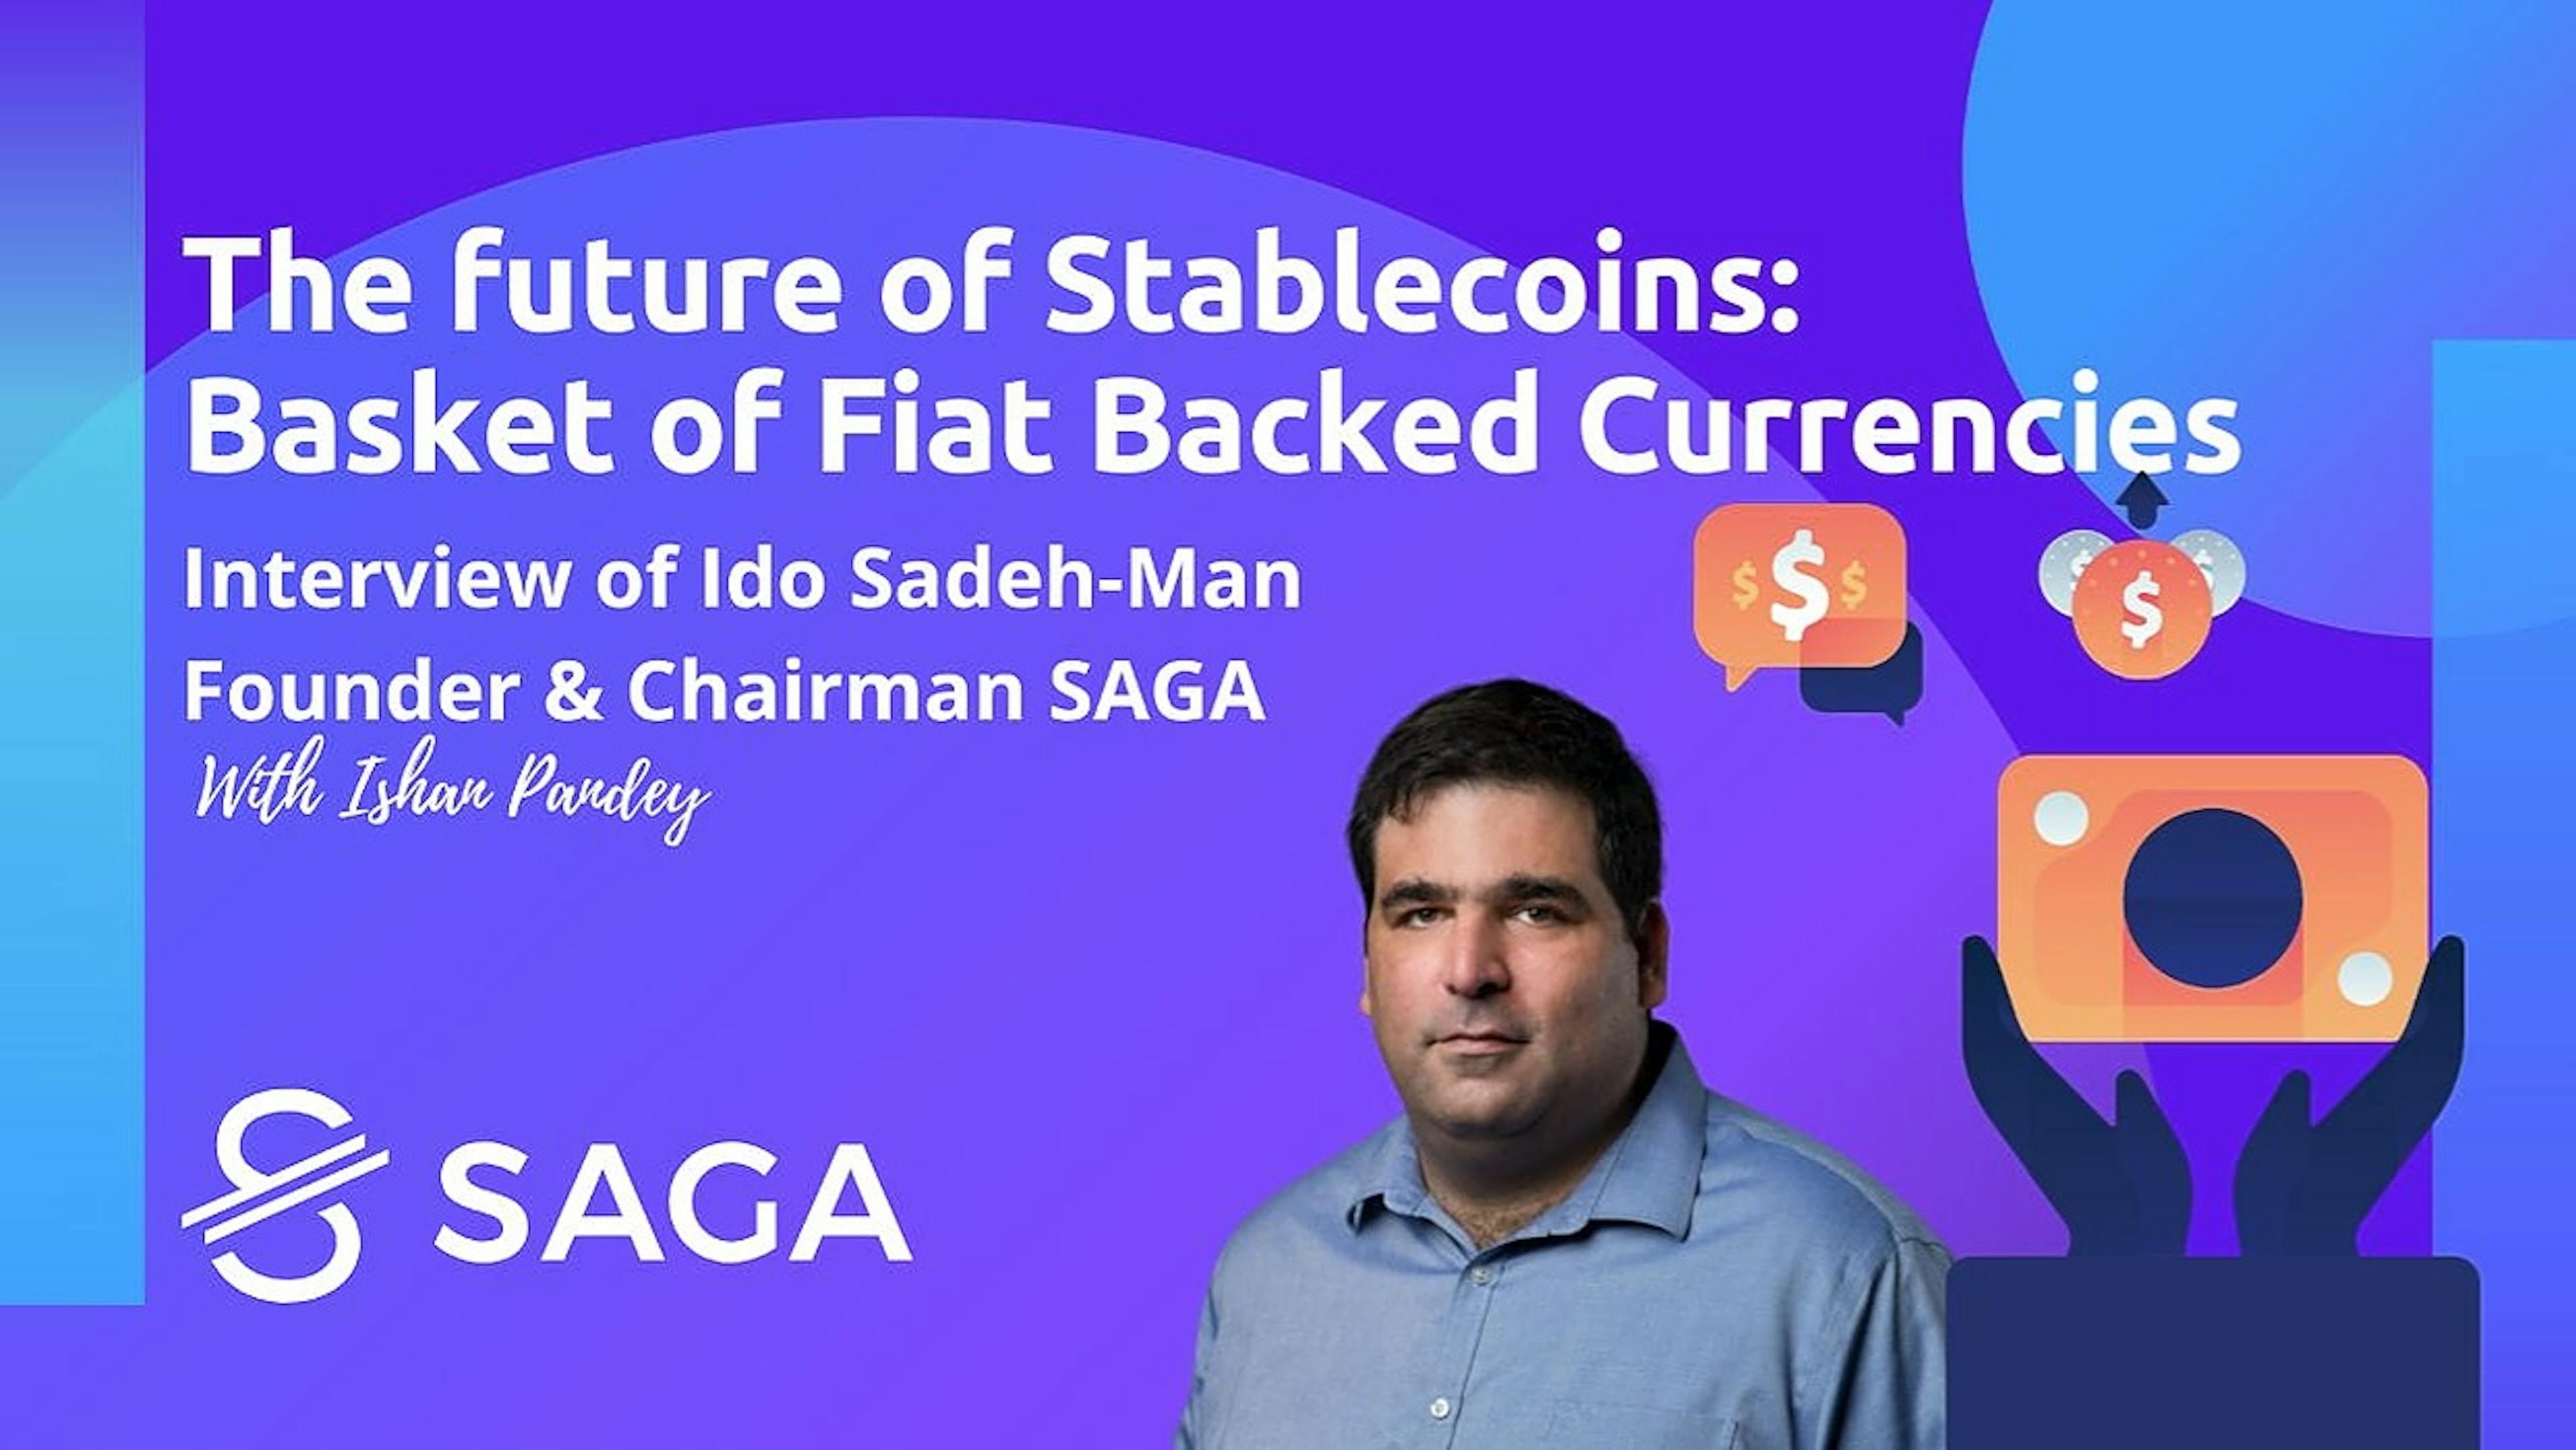 /is-saga-the-future-of-stablecoin-and-a-new-monetary-regime-interview-with-ido-sadeh-man-hm3d300t feature image